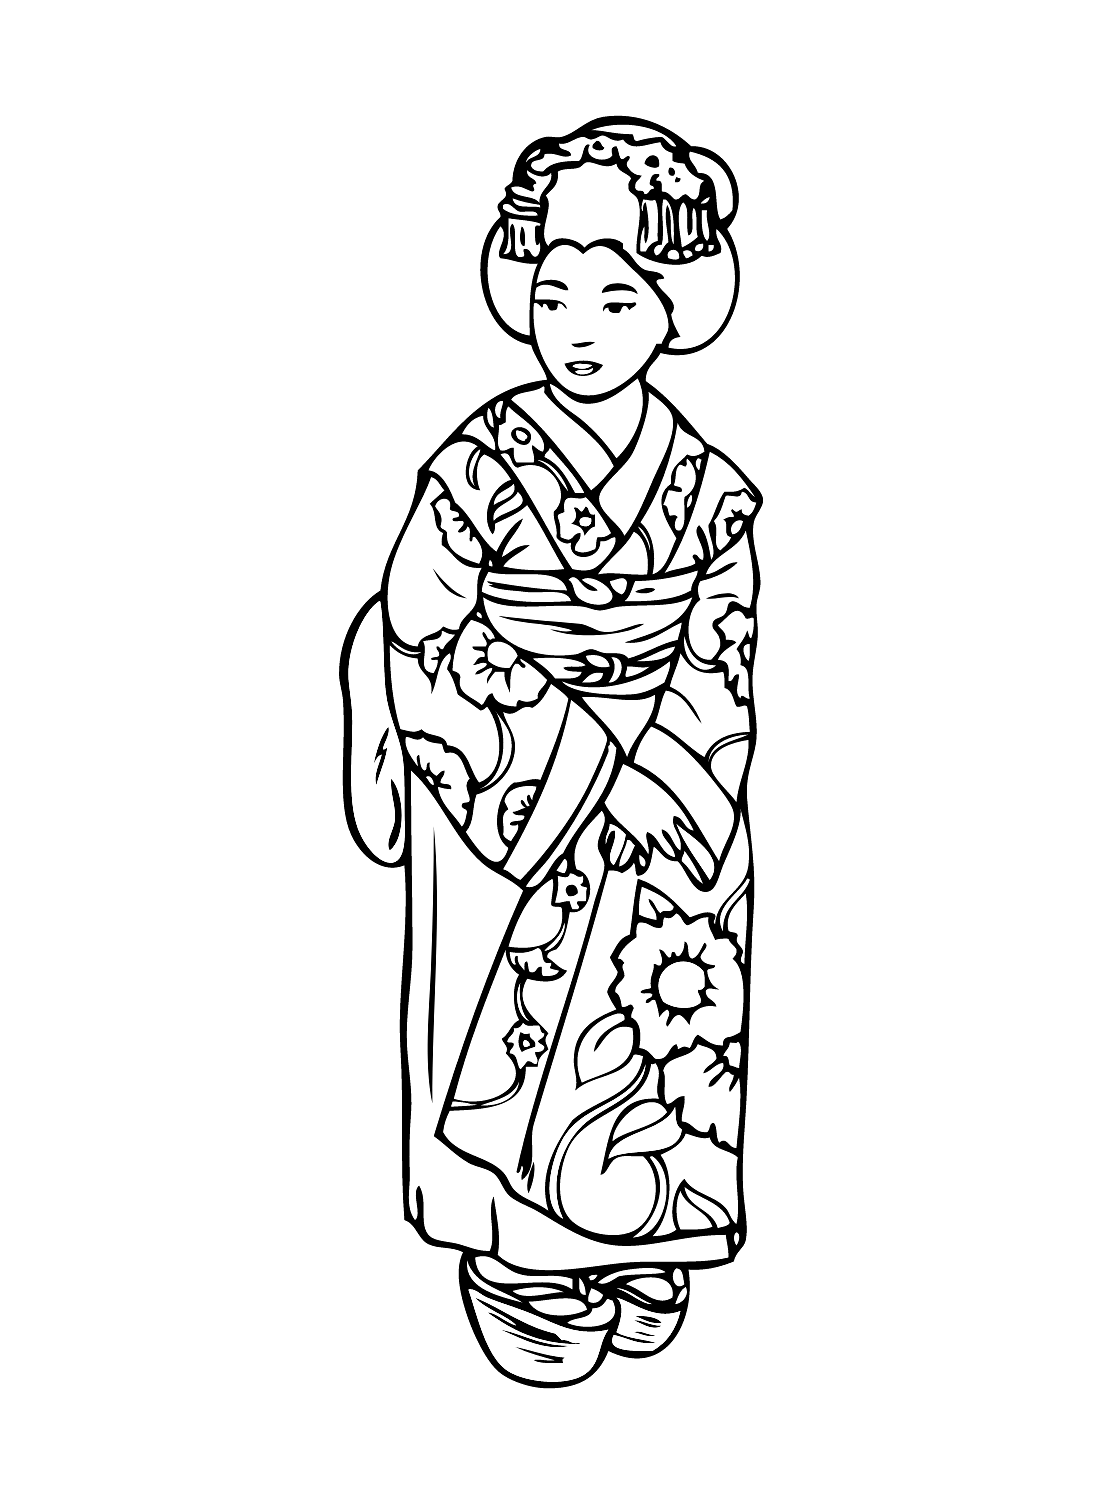 Japanese Woman in Kimono Coloring Page